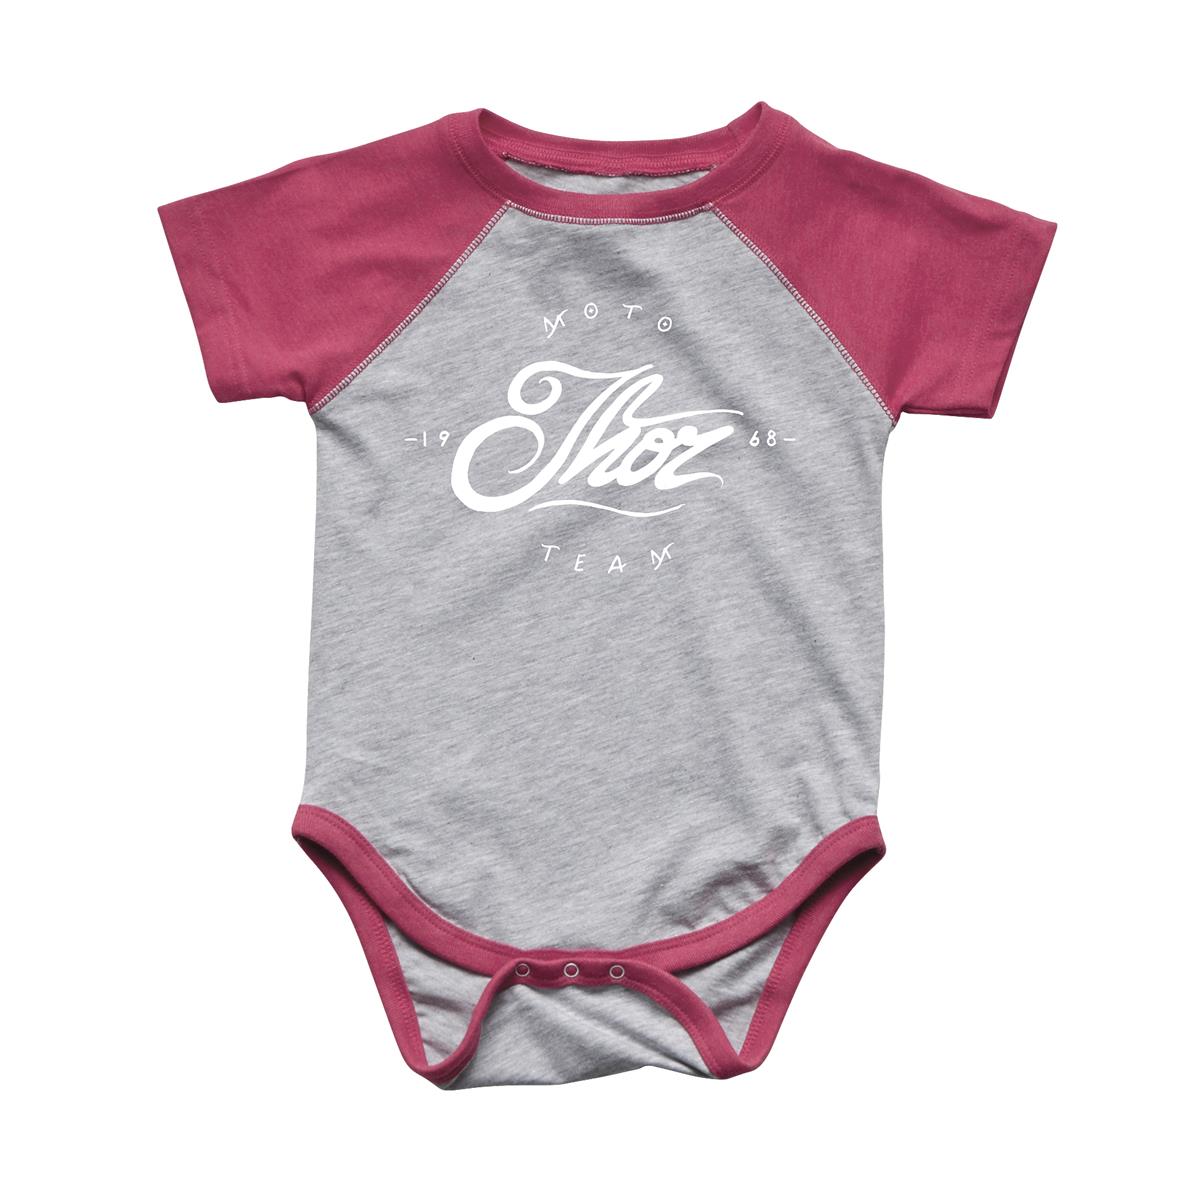 Thor Baby Body The Runner Supermini - Pink